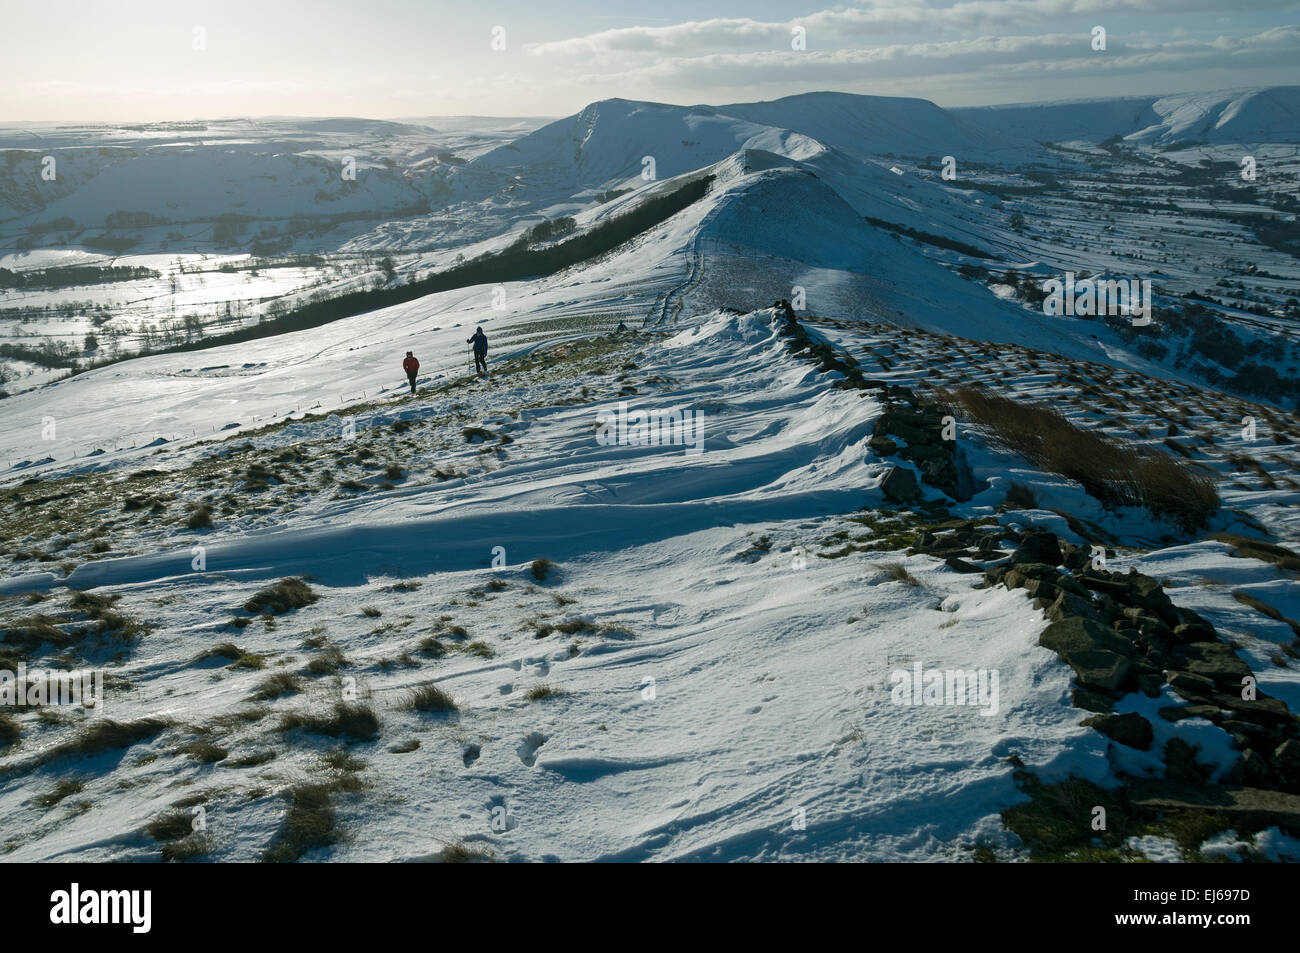 The 'Great Ridge' leading to Mam Tor in winter, from Lose Hill, Edale, Peak District, Derbyshire, England, UK. Stock Photo